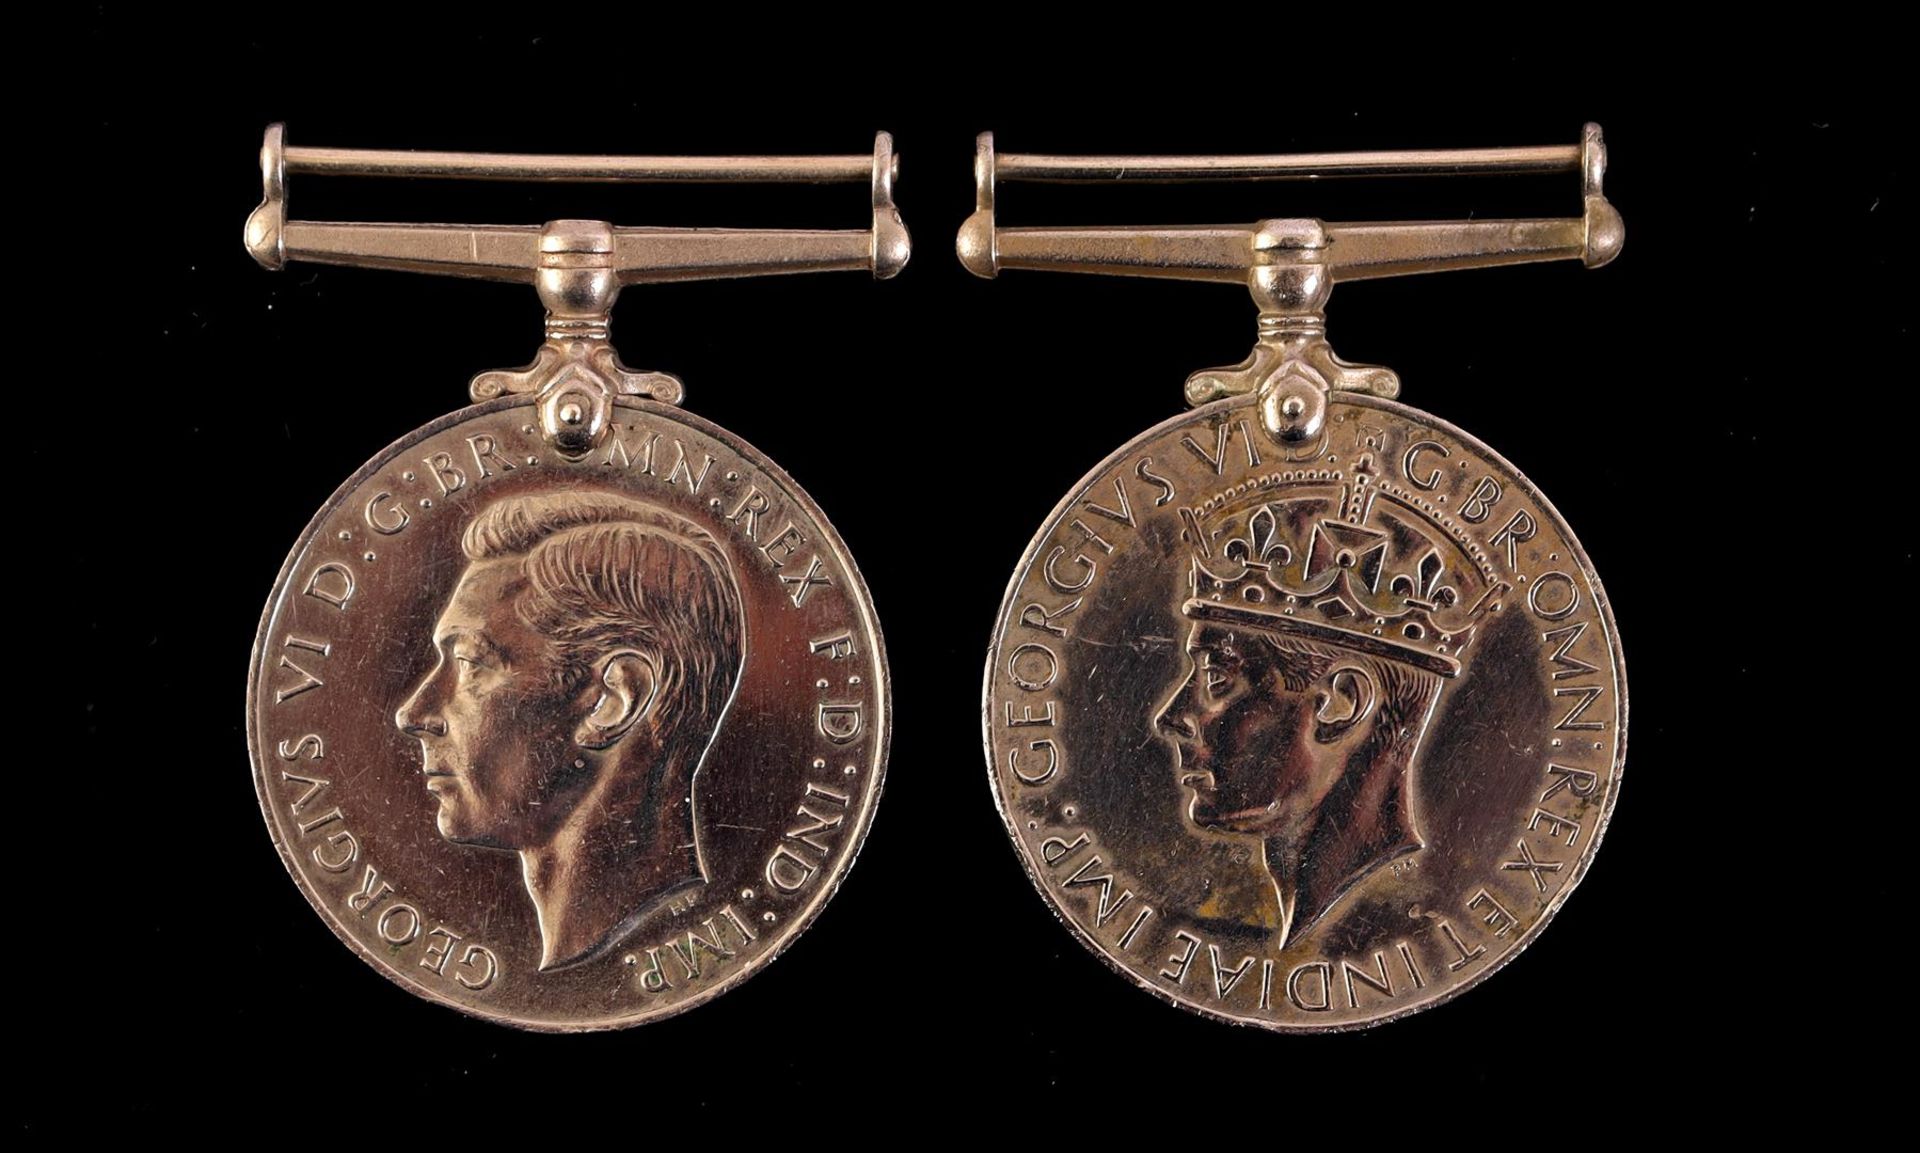 English medals from the WWII period, The War Medal and The Defense Medal